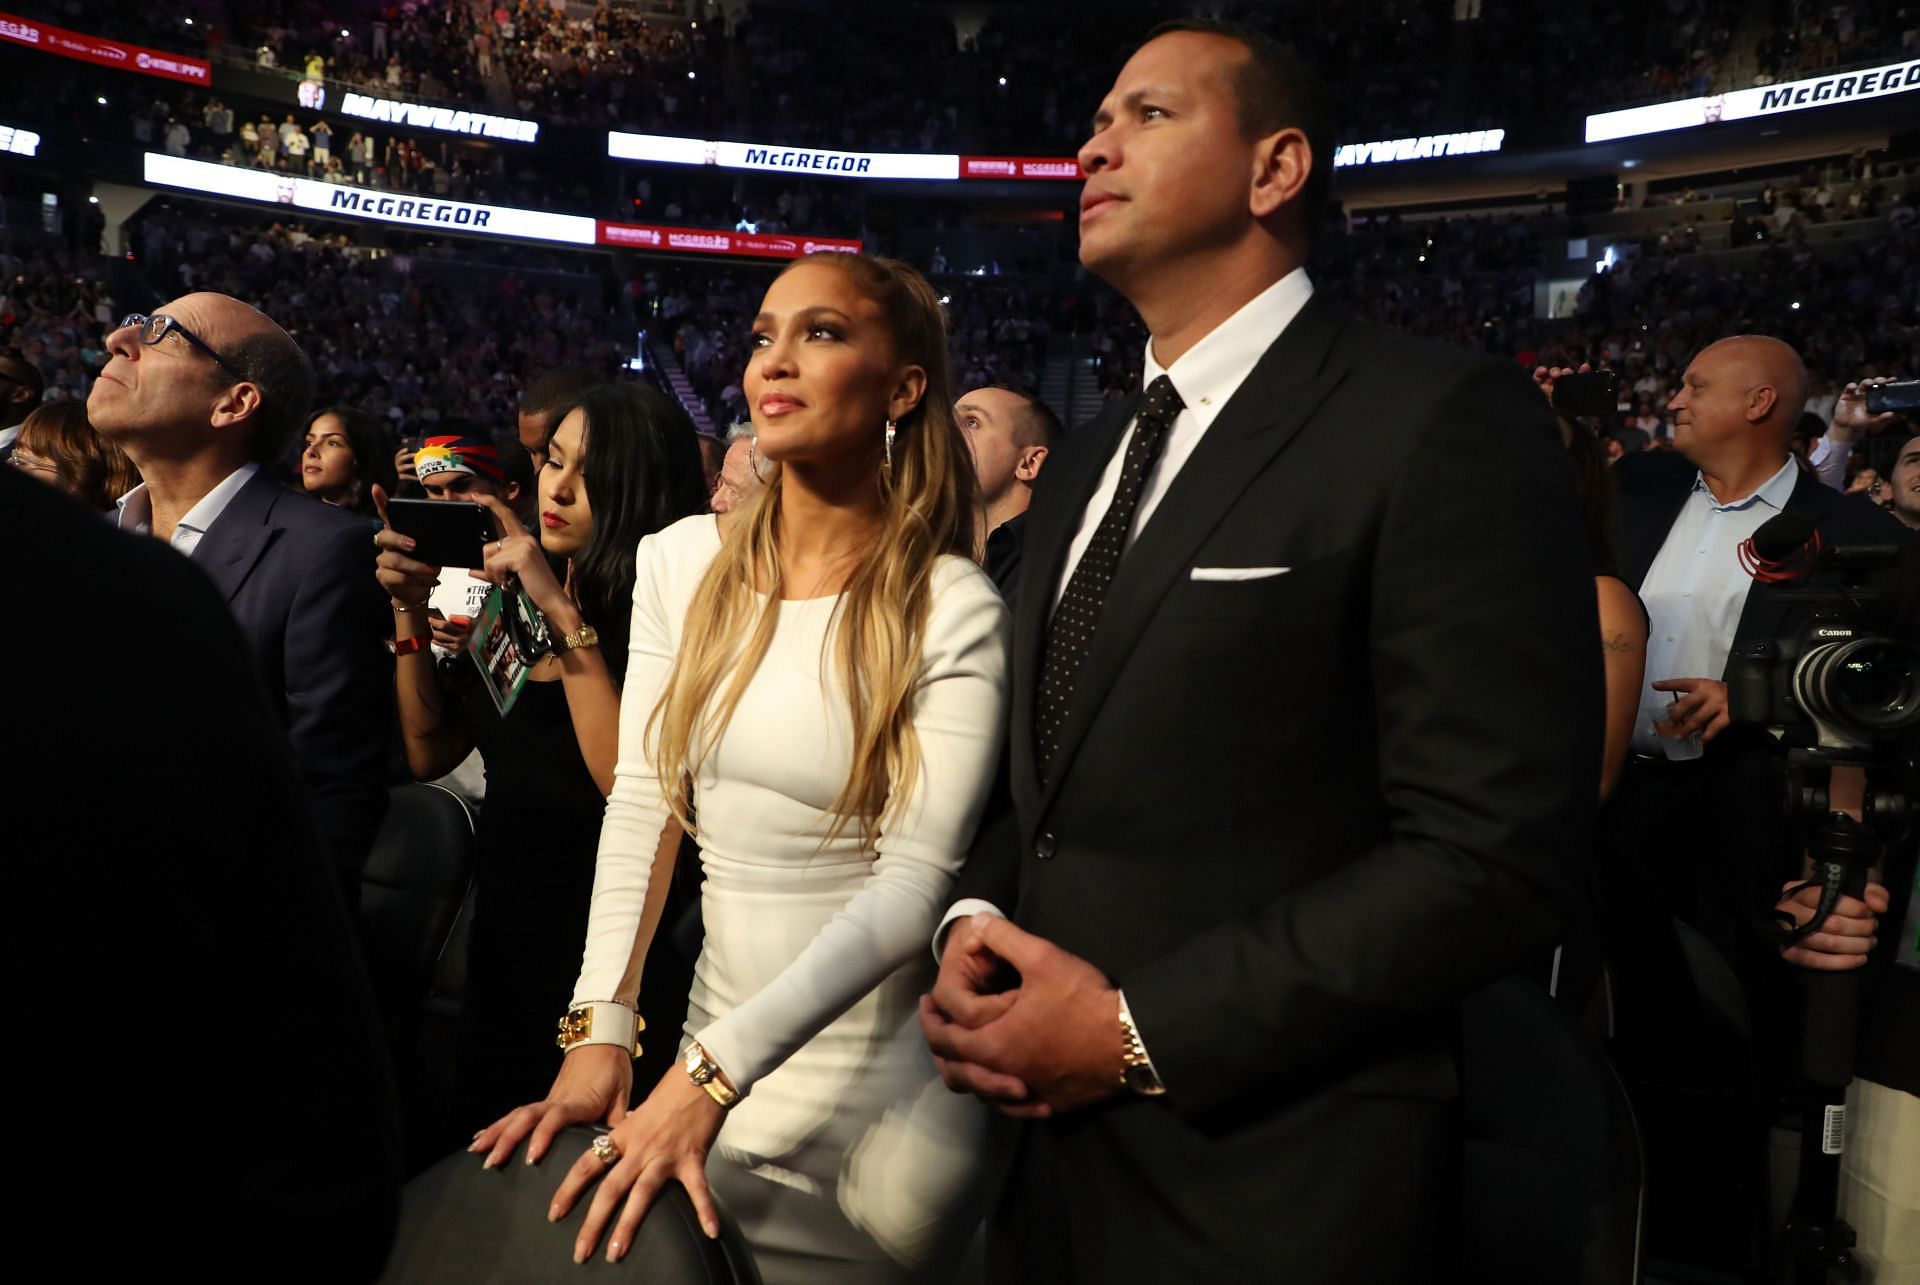 Alex Rodriguez and Lopez were spotted together at various events.